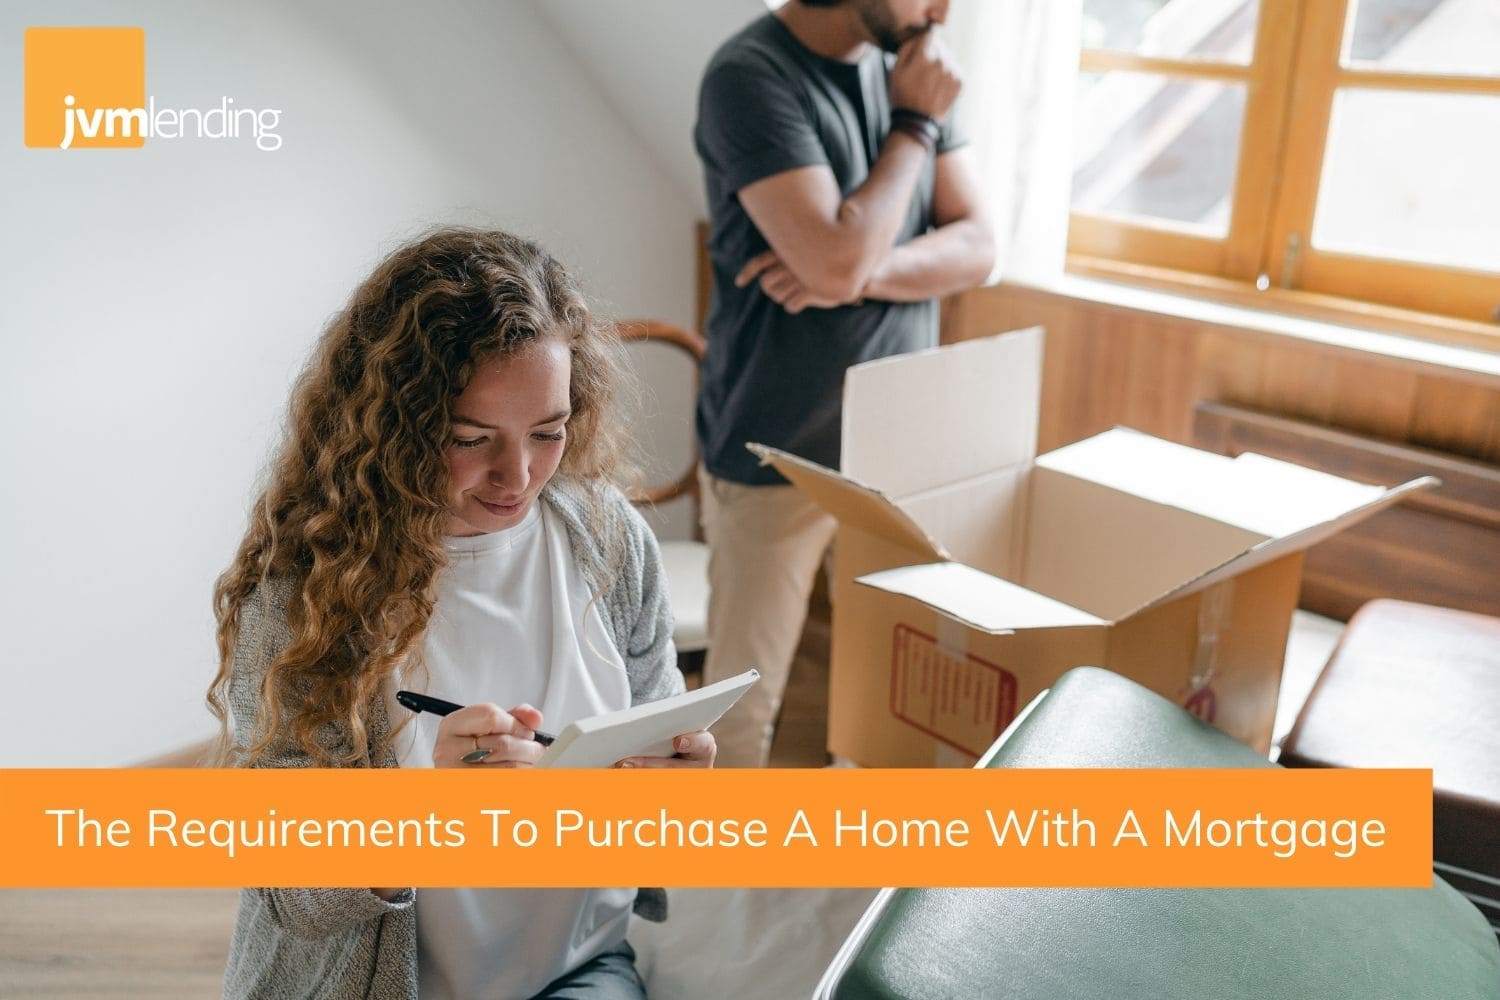 A homebuyer reviews their checklist of mortgage requirements while planning to move and purchase their new home using mortgage financing.